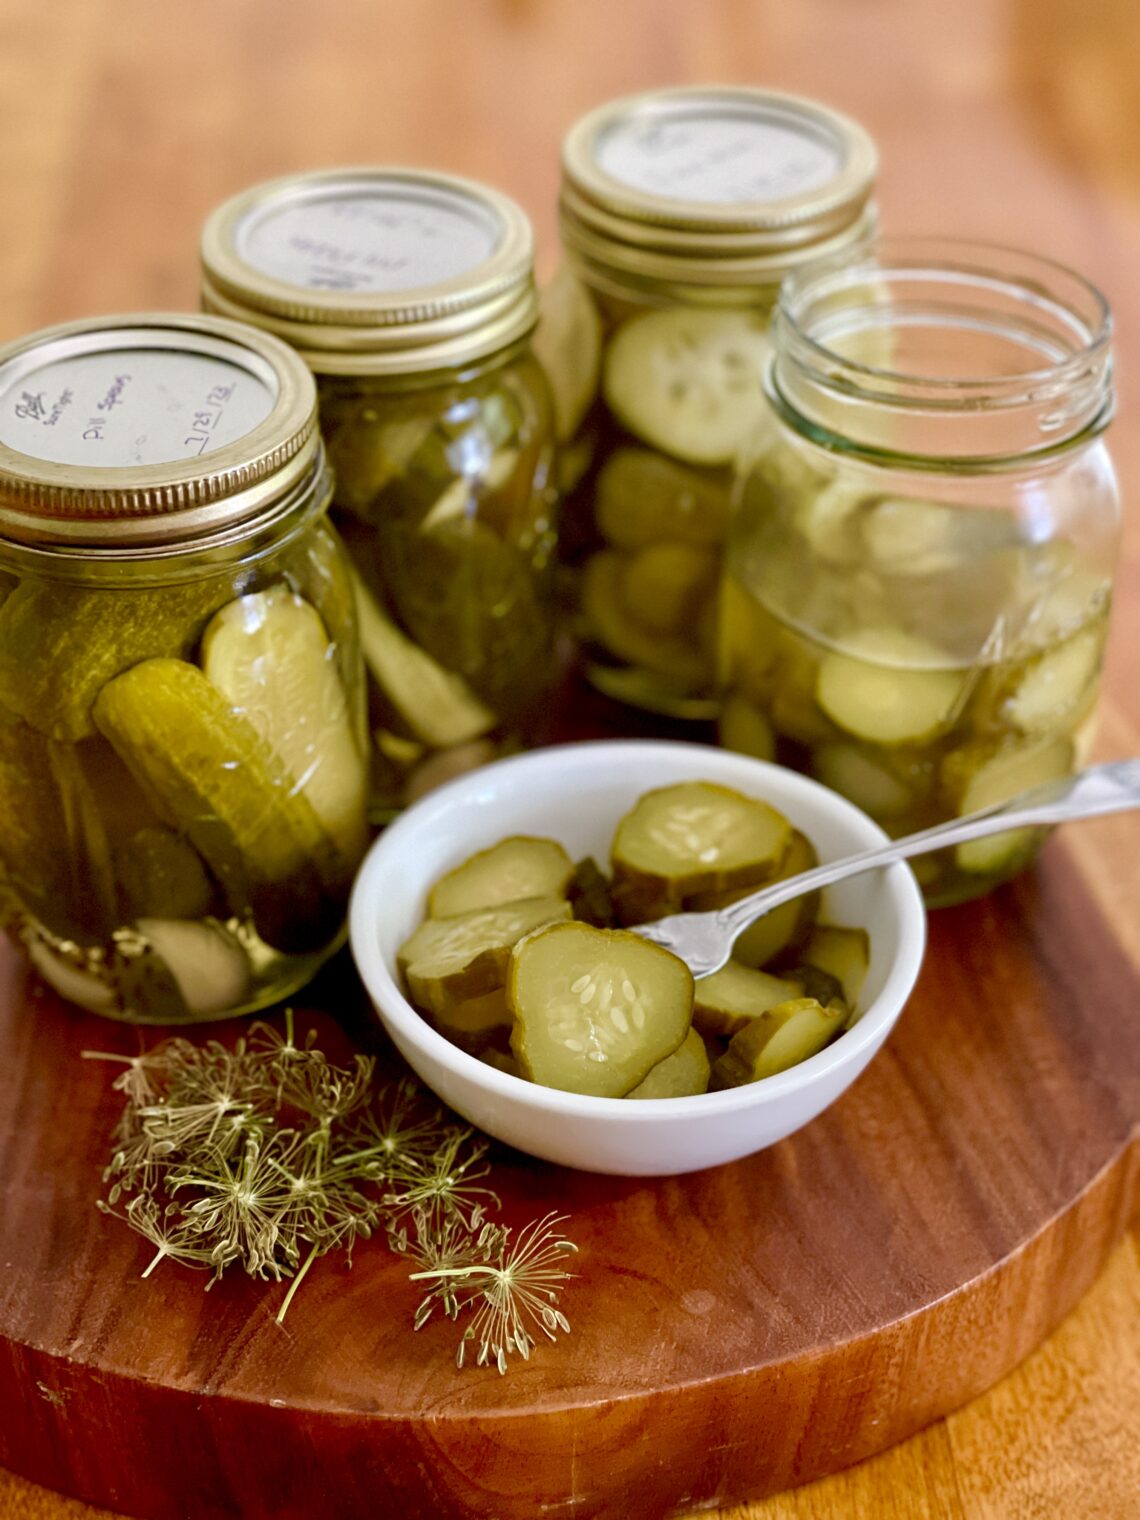 dill pickle jars and bowl